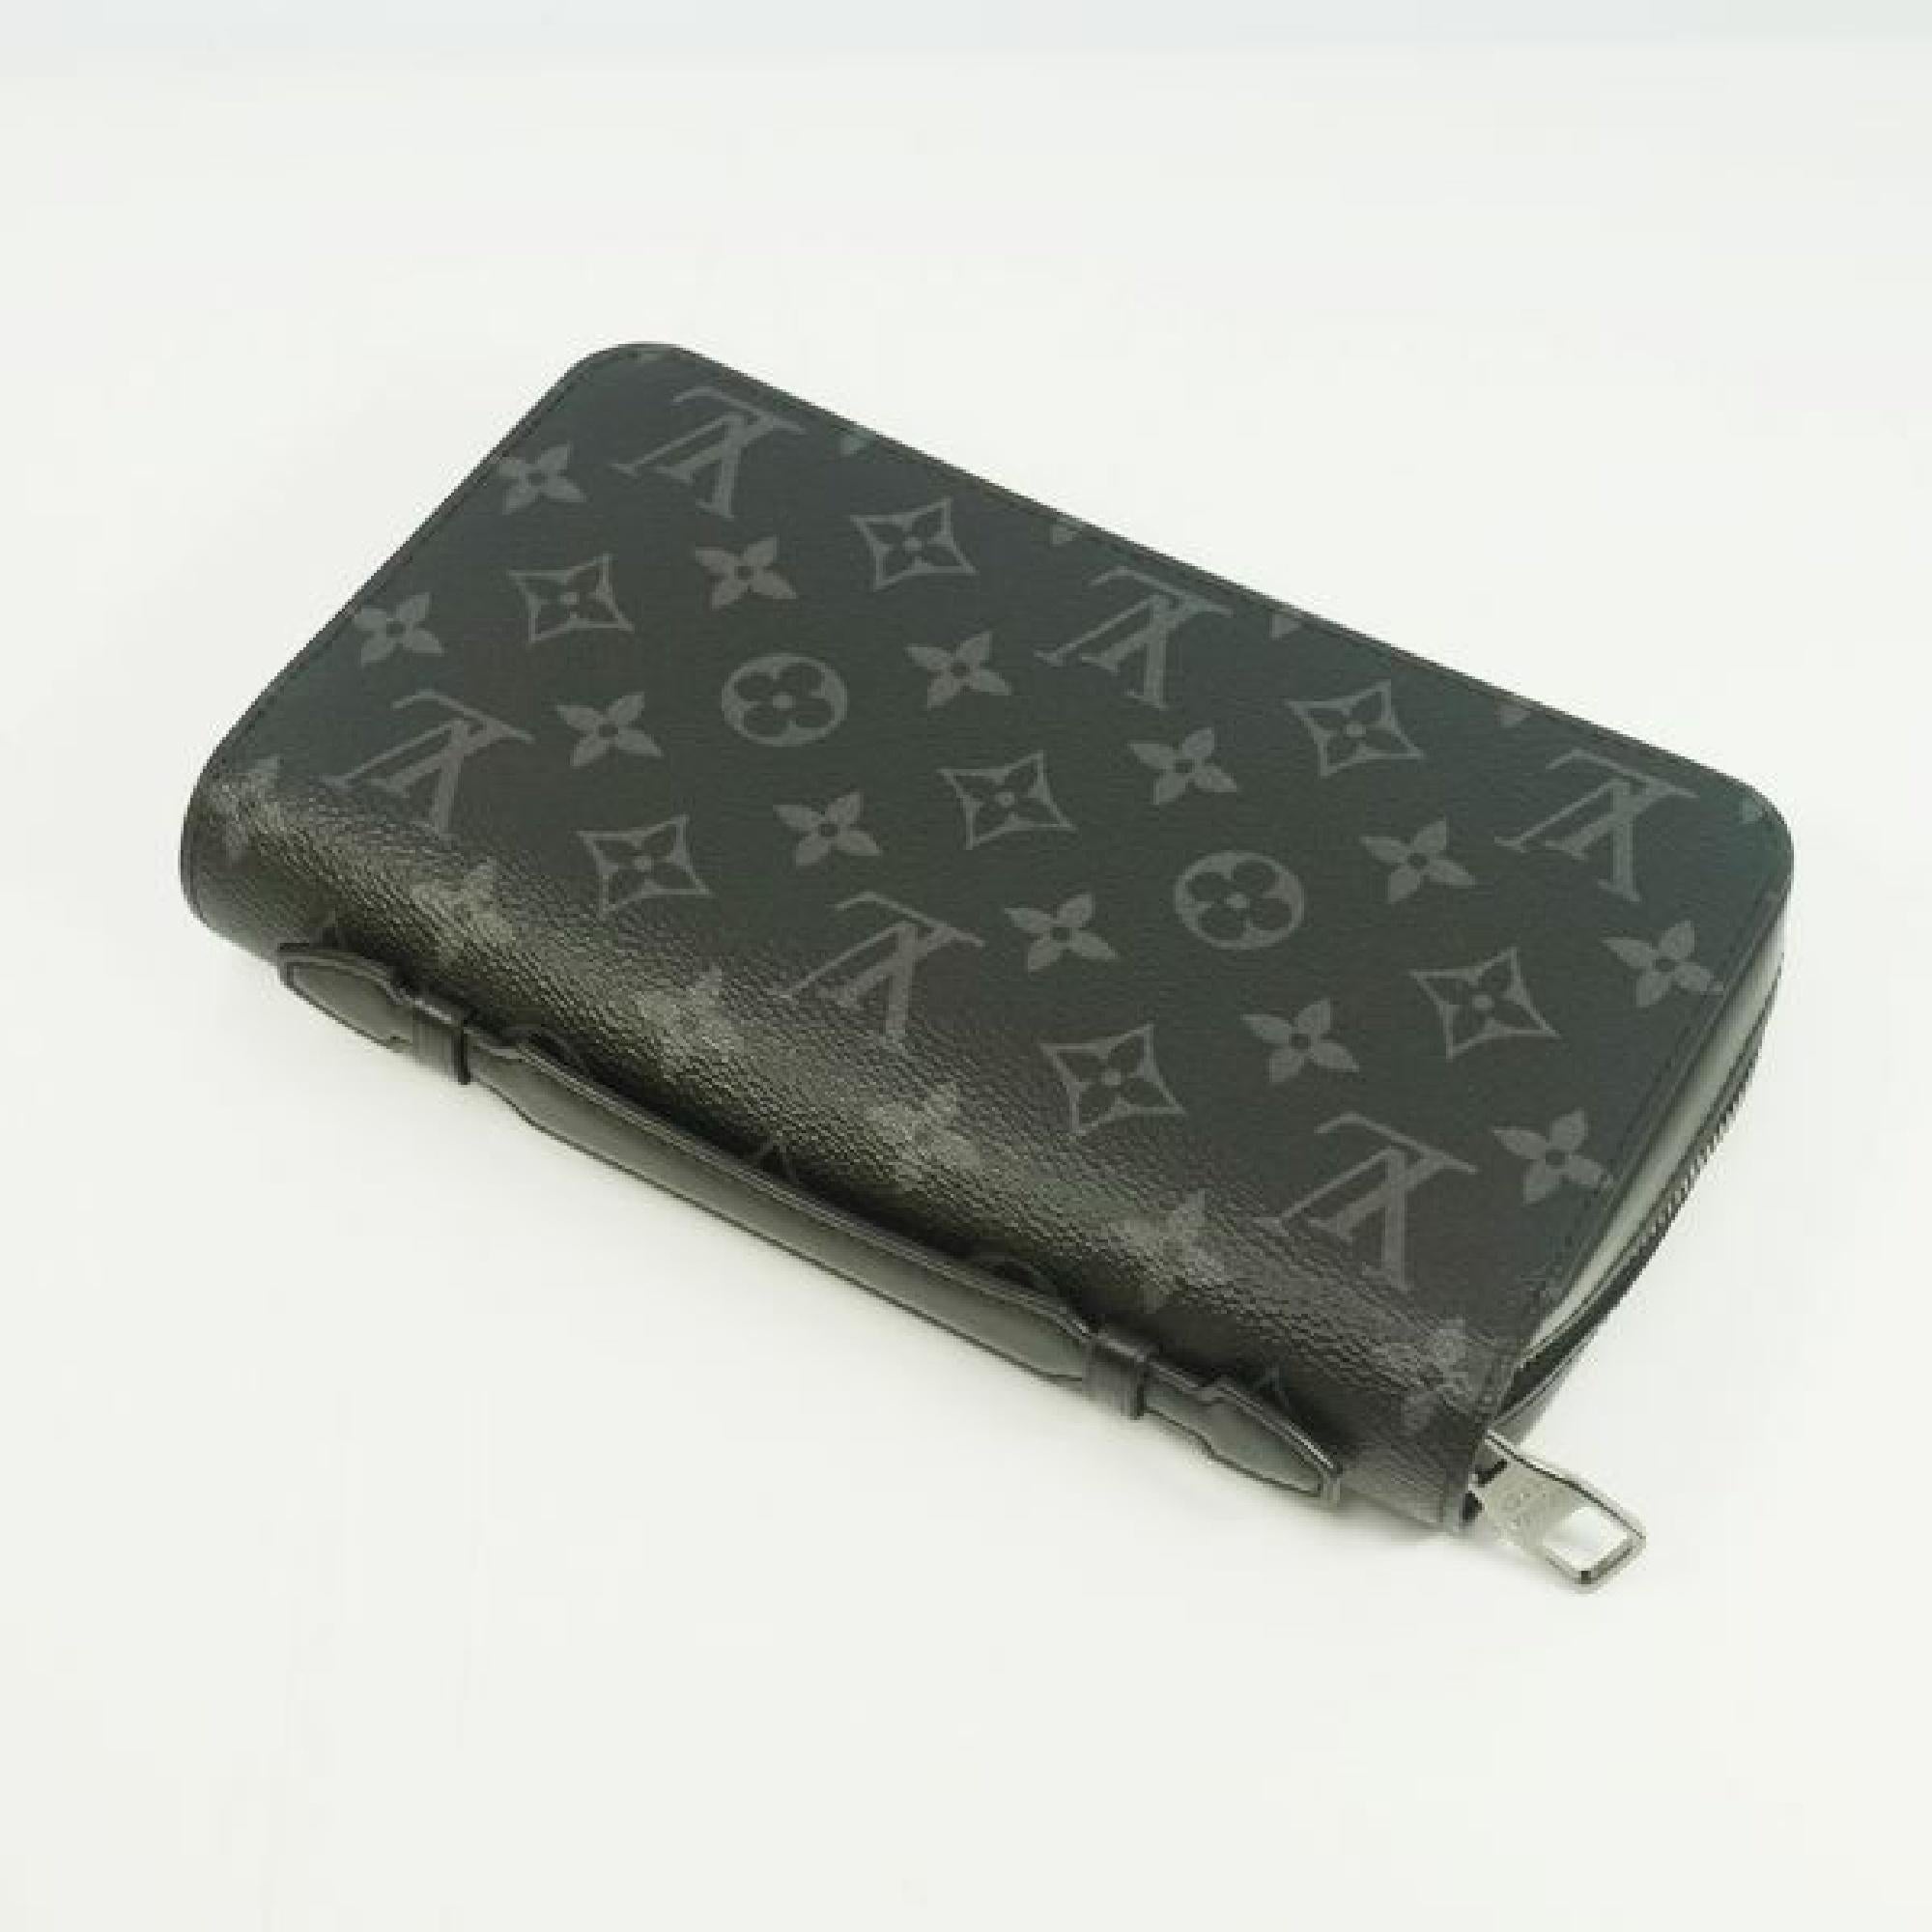 An authentic LOUIS VUITTON Monogram eclipse ZippyXL Mens long wallet M61698 The outside material is Monogram  eclipse. The pattern is ZippyXL. This item is Contemporary. The year of manufacture would be 2016.
Rank
A beautiful goods
Used items with